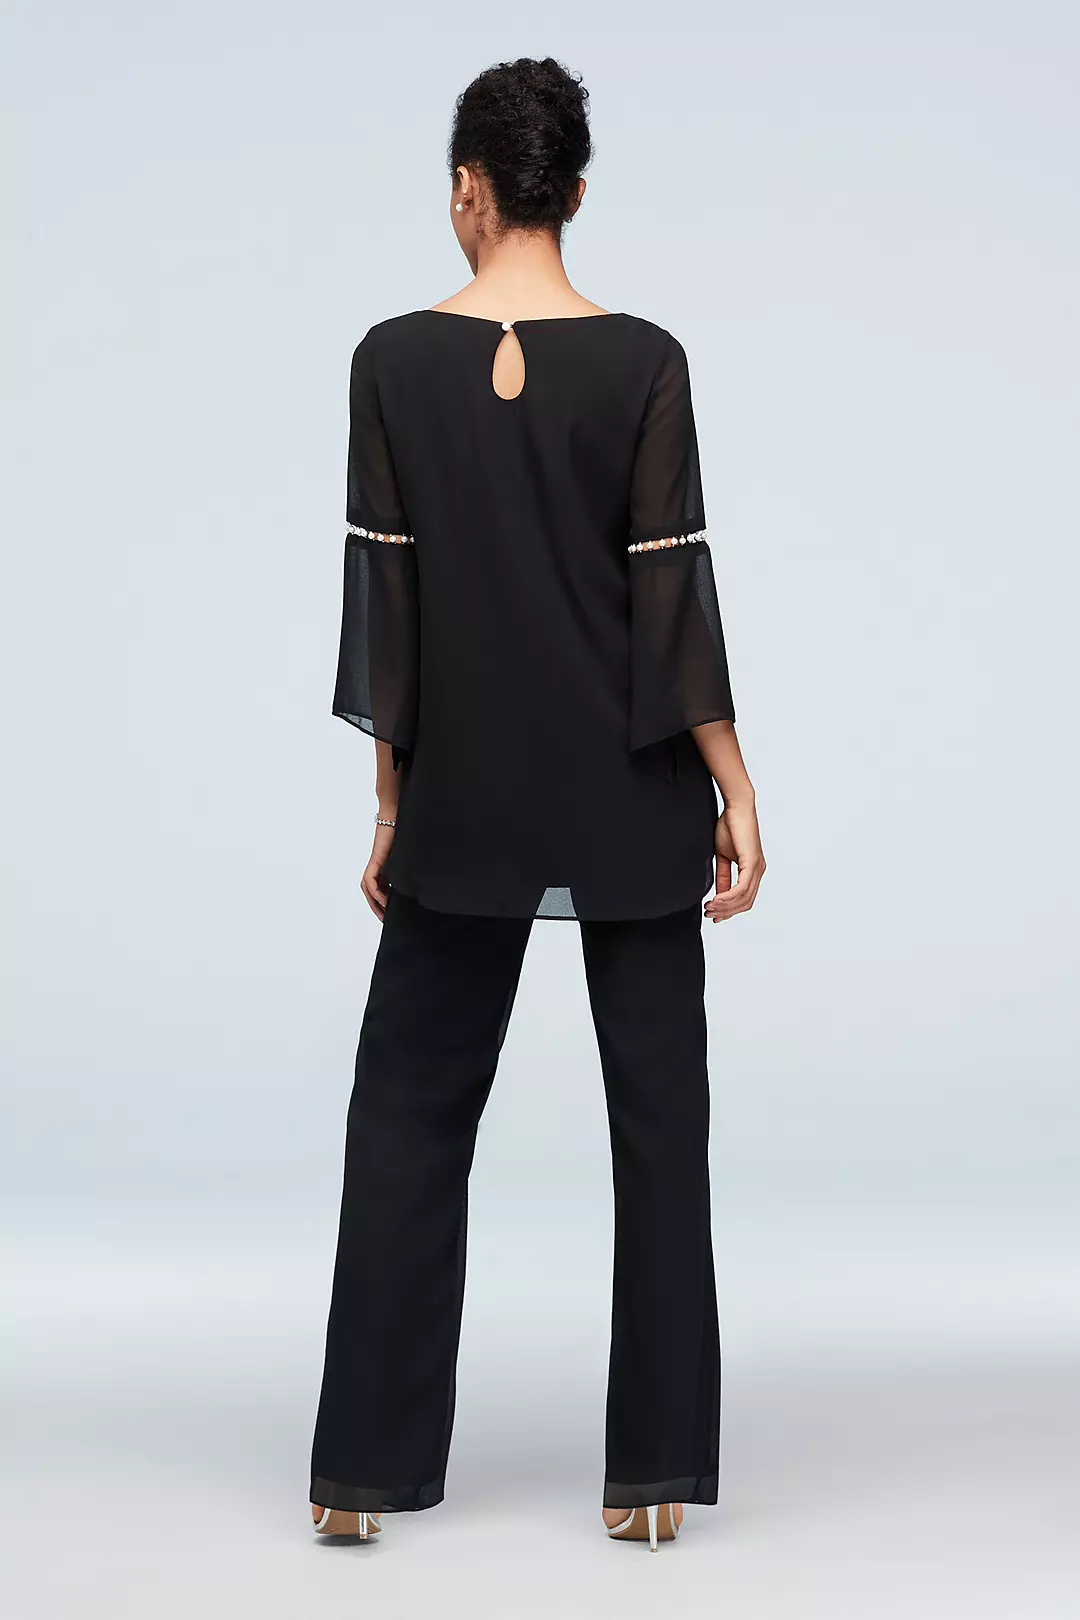 Asymmetric Hem Pants and Top Set with Pearl Detail Image 2